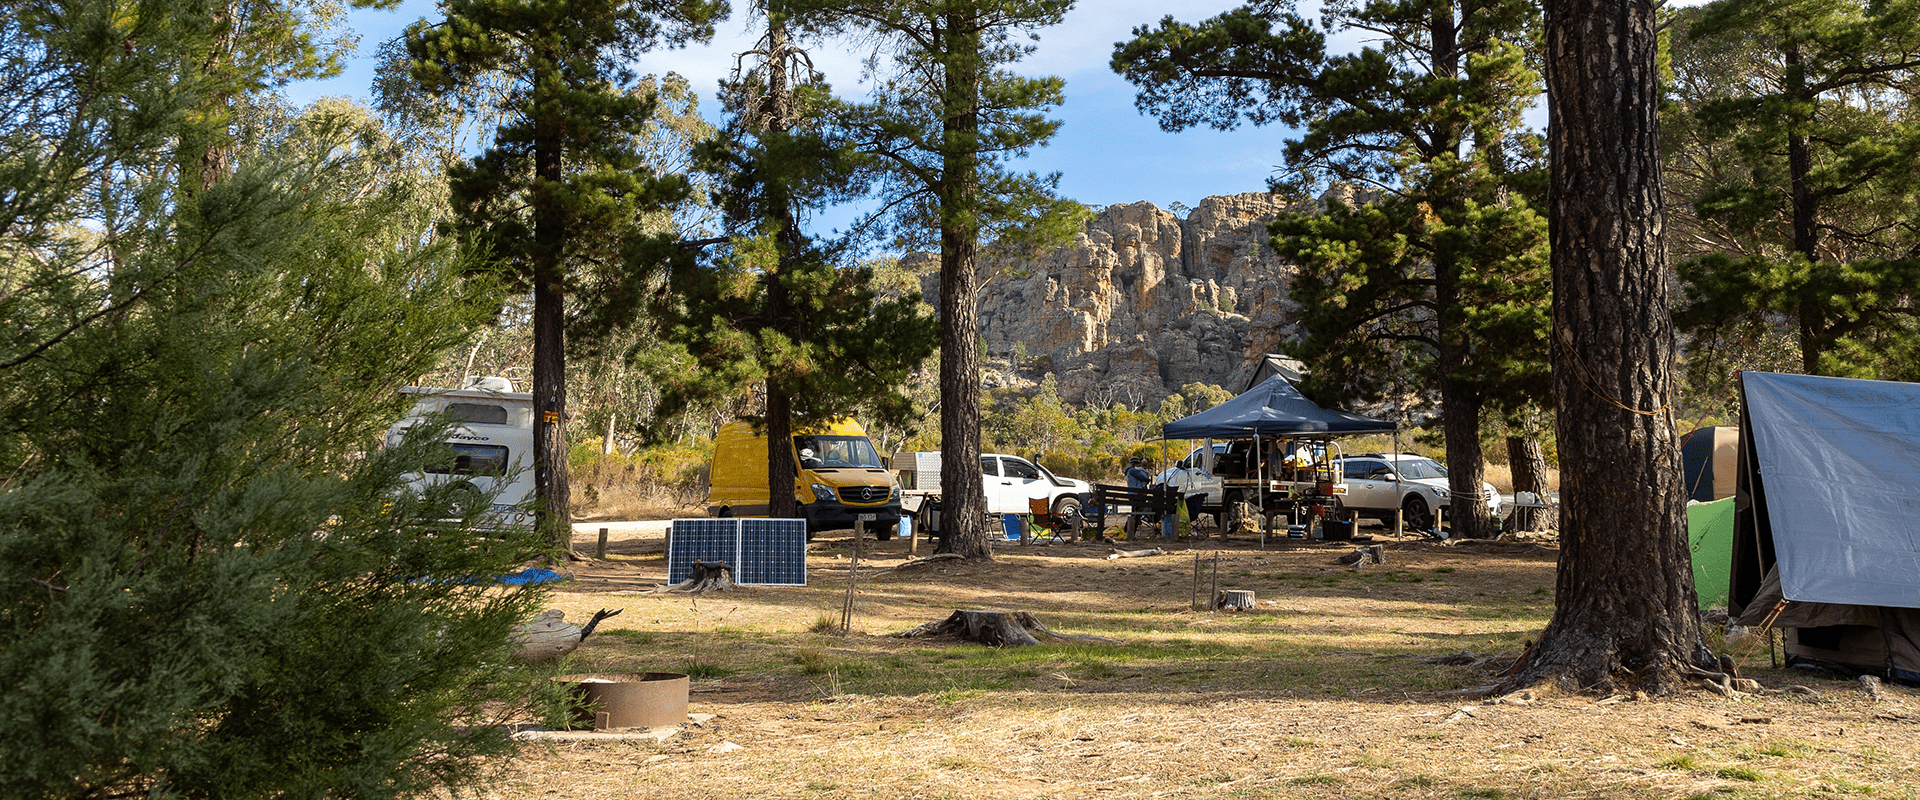 A camp site with tall pine trees with rock climbing boulders in the back ground, there are 4 wheel drives, tents and caravans camping